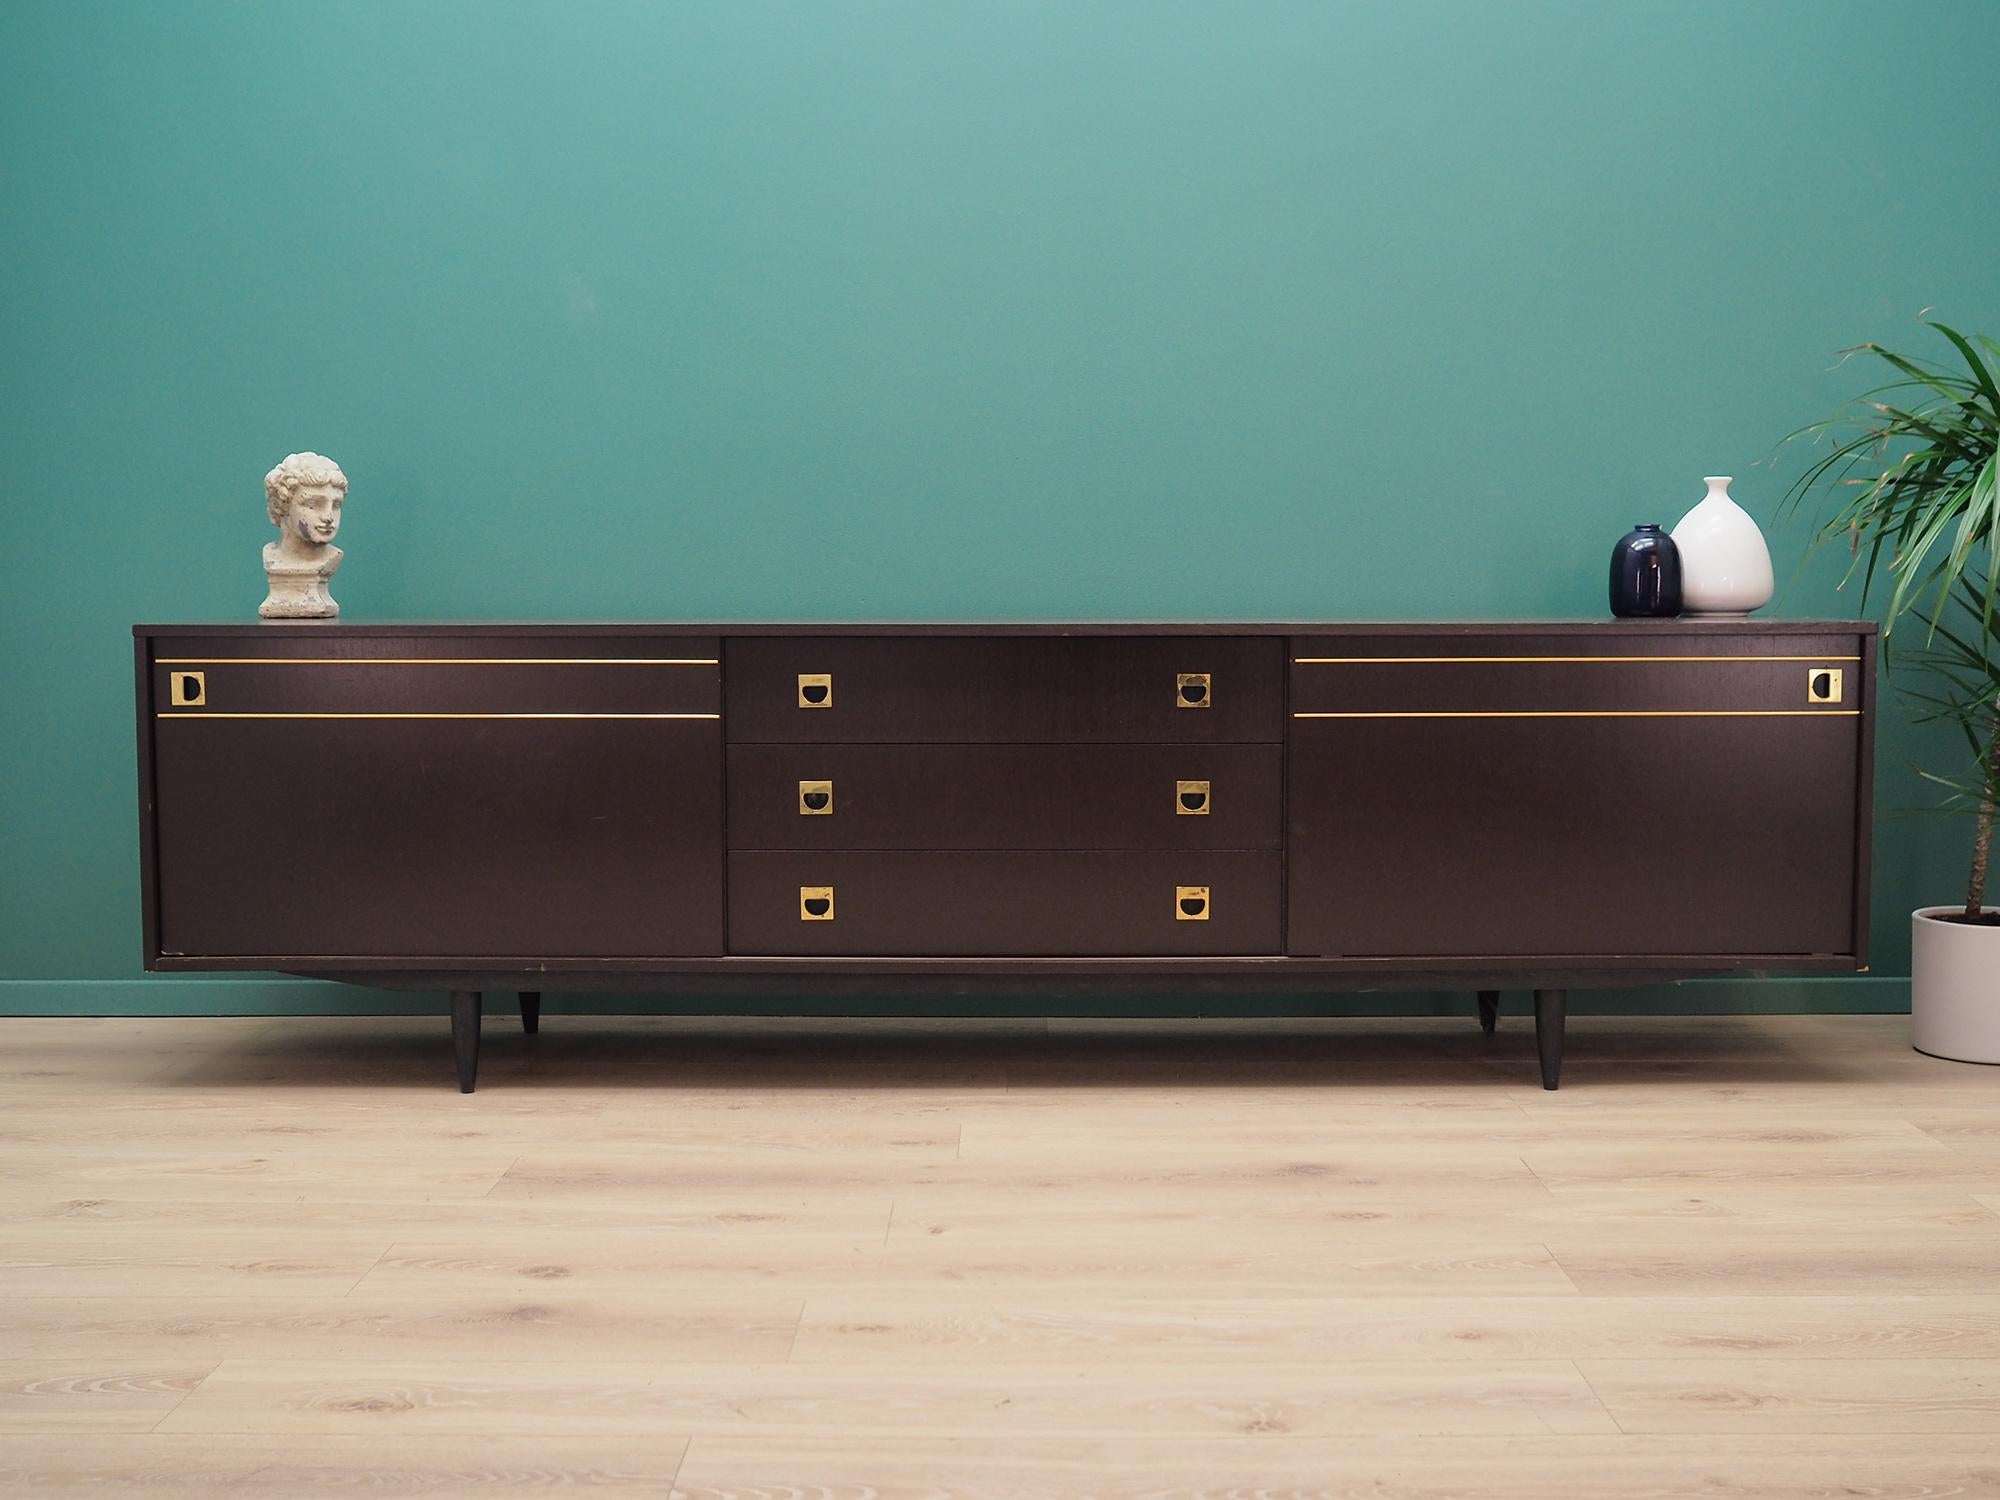 An extraordinary 1970s-1980s sideboard, a brilliant form. Furniture made in Sweden. Preserved in good condition, directly for use (several scratches, abrasions visible).

Dimensions: height 69 cm, length 248.5 cm, depth 48.5 cm.